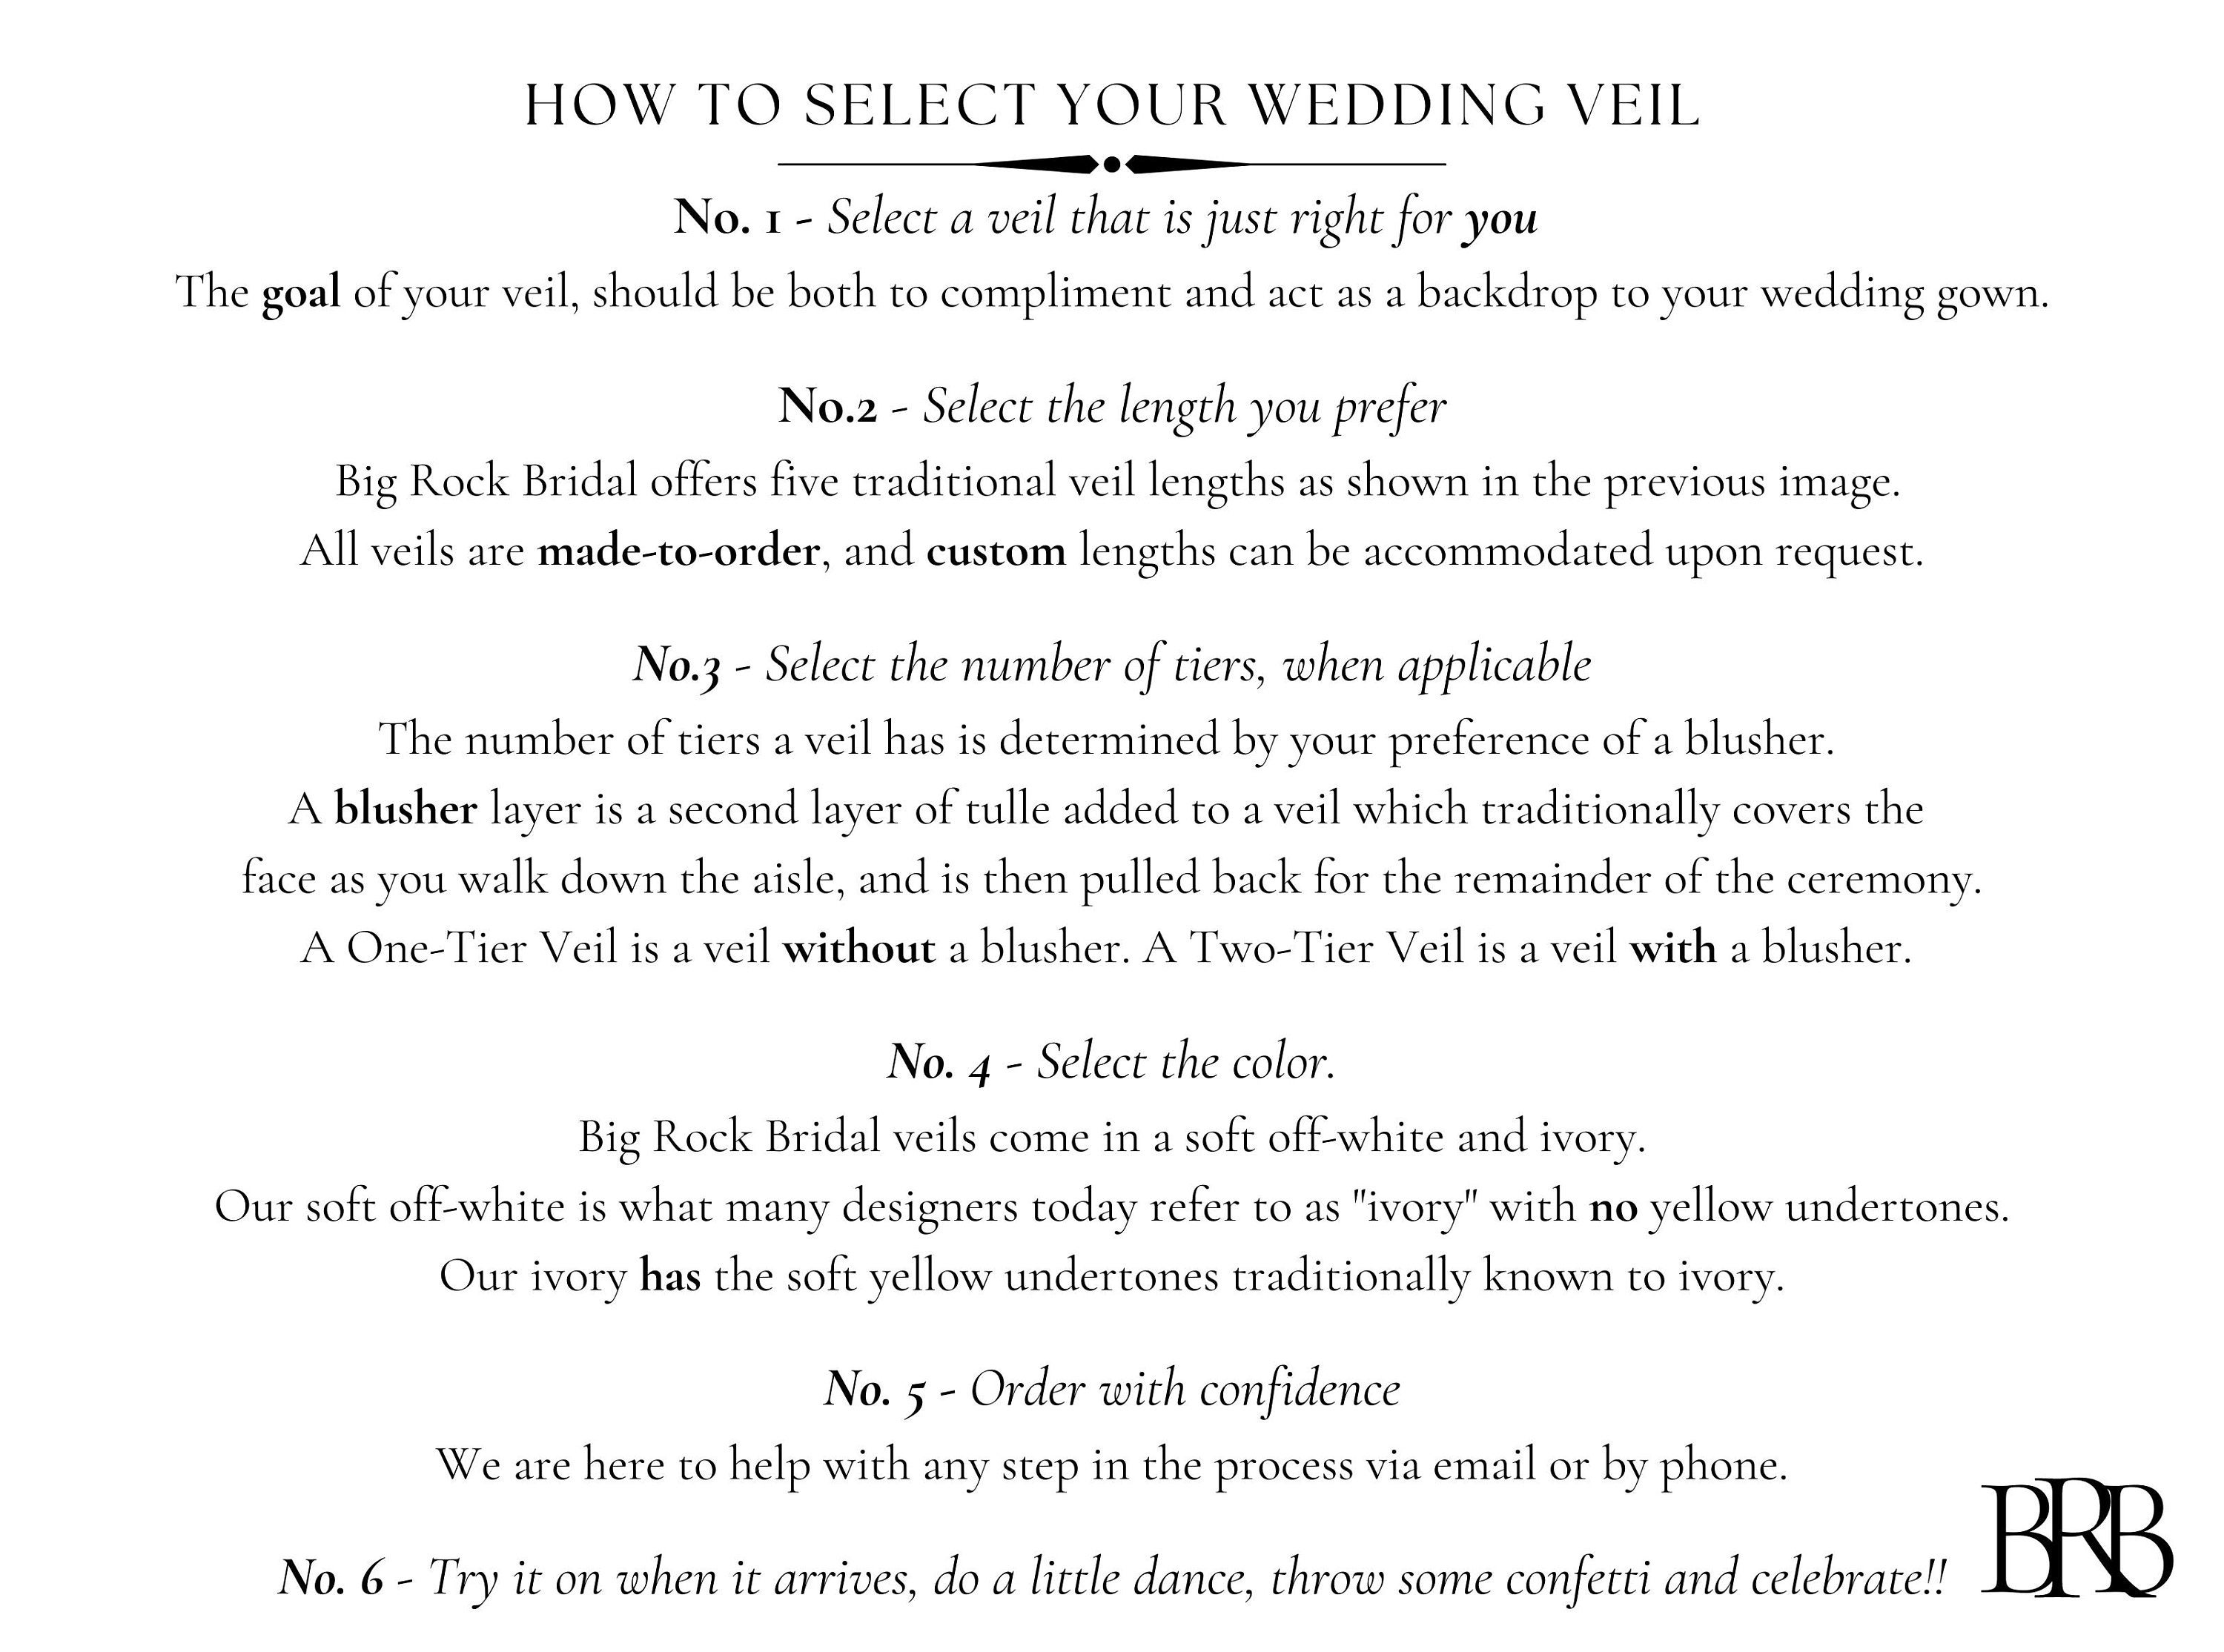 The Best Time to Take Off Your Wedding Veil